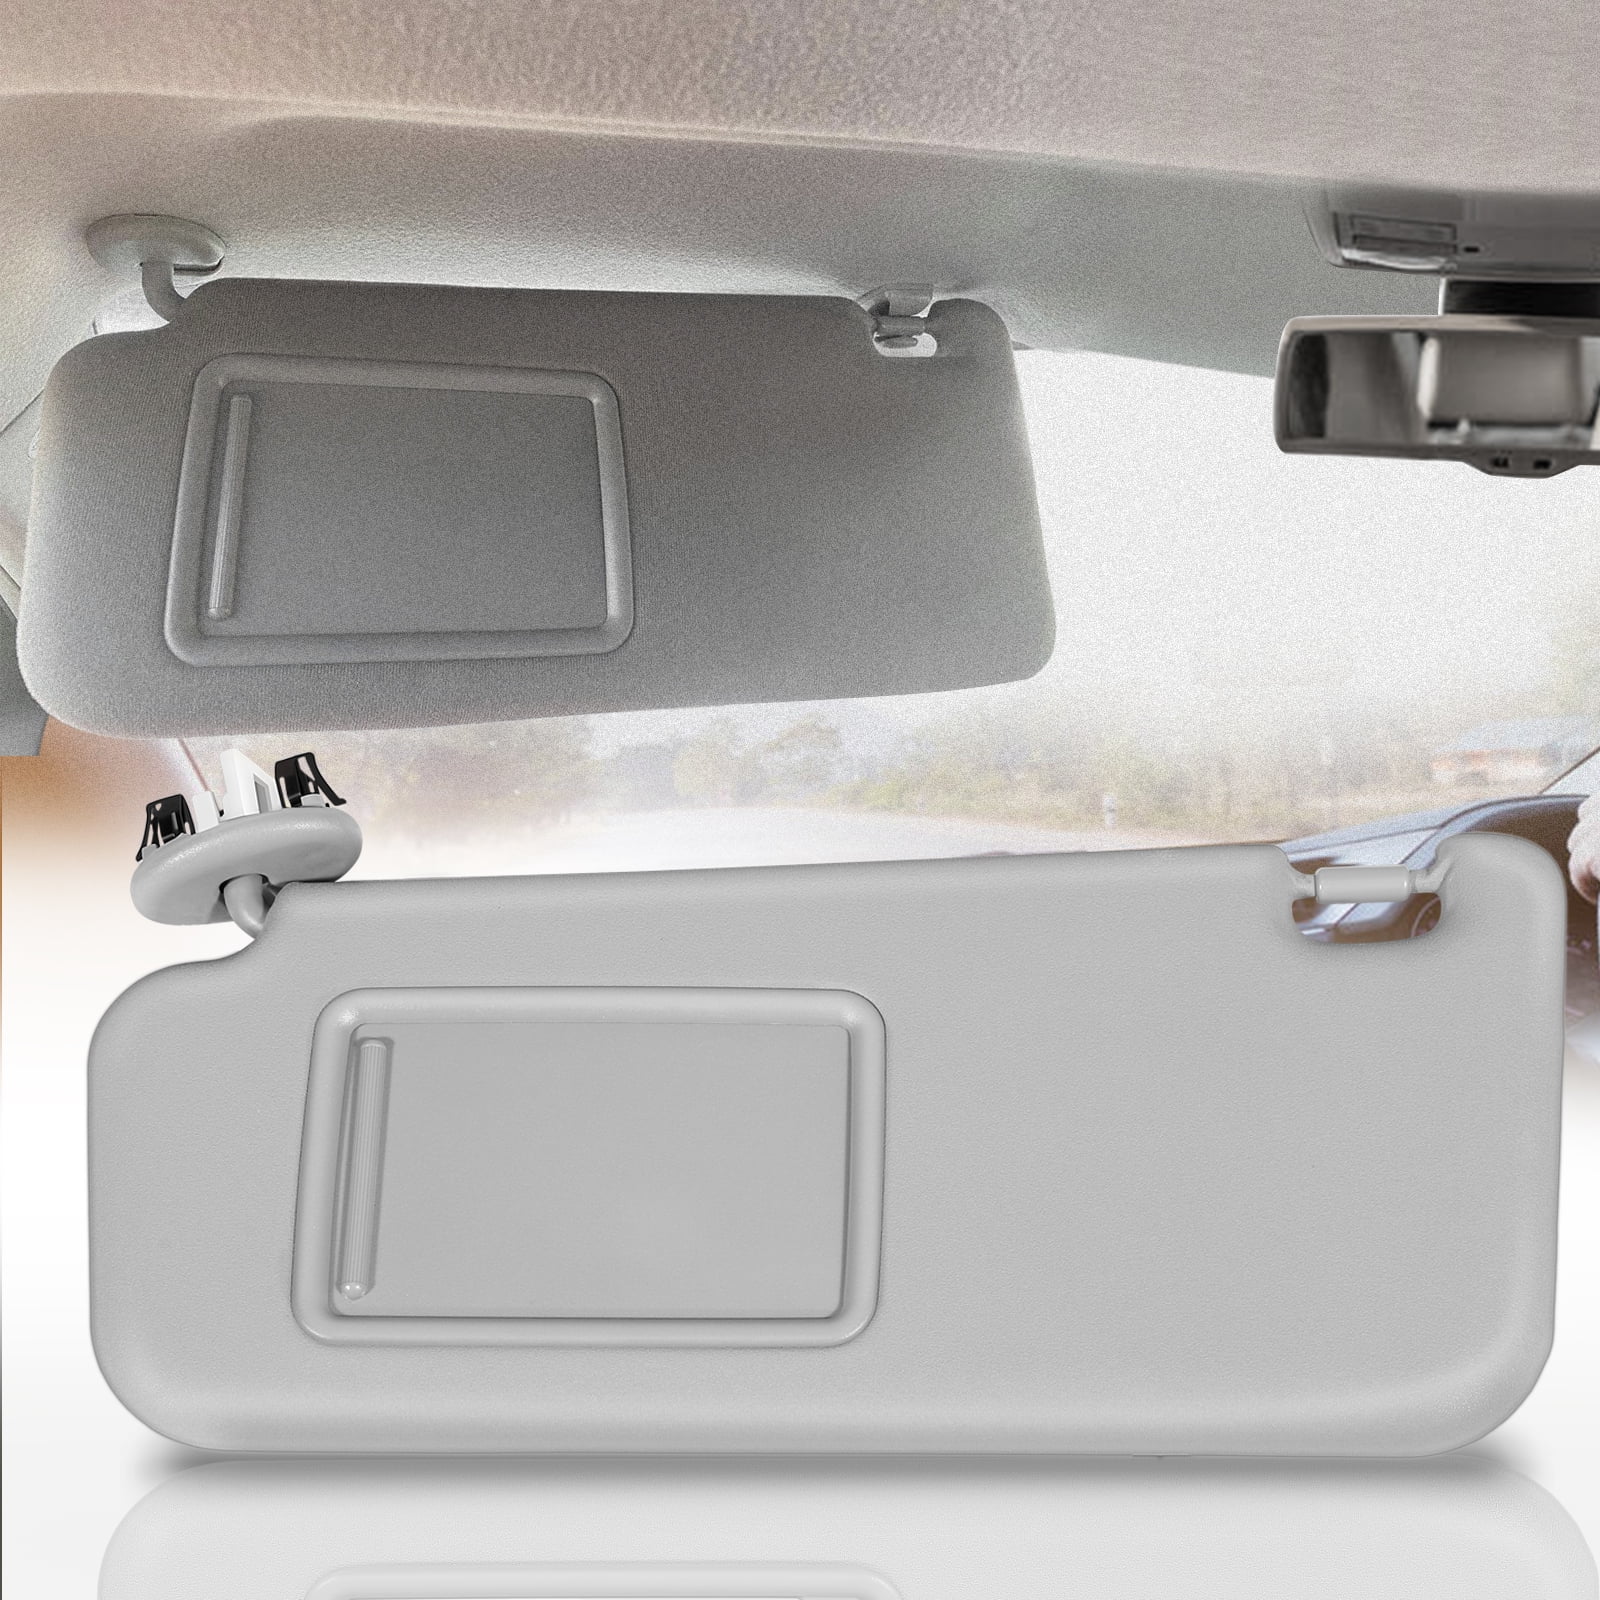 OE:74320-42501-B3,74320-42500-B3 SCITOO Beige Left Driver Side Interior Sun Visor fit for for Toyota RAV4 2006-2013 with Sunroof 